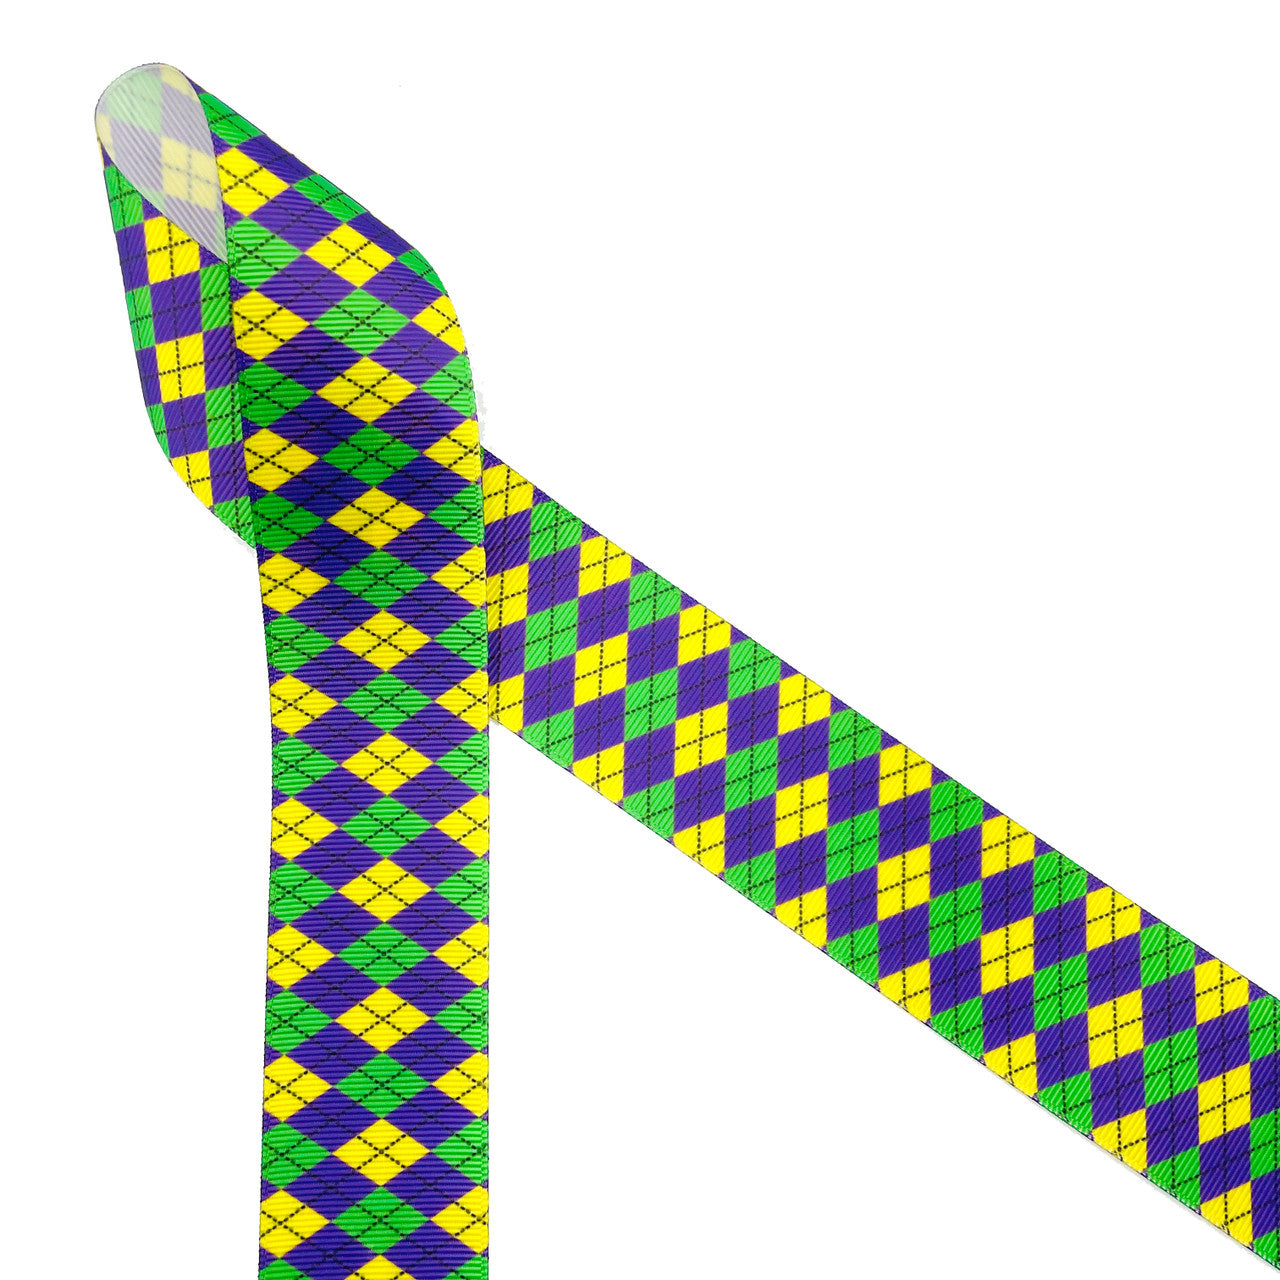 Mardi Gras themed argyle ribbon in yellow, purple and green printed on 1.5" white grosgrain ribbon is ideal for celebrating Mardi Gras is so many ways! This ribbon is perfect for gift wrapping those King Cakes, gift baskets, party decor, floral design, and table scapes. Use this ribbon for Mardi Gras themed crafts, wreath making, sewing and quilting projects too. All our ribbon is designed and printed in the USA